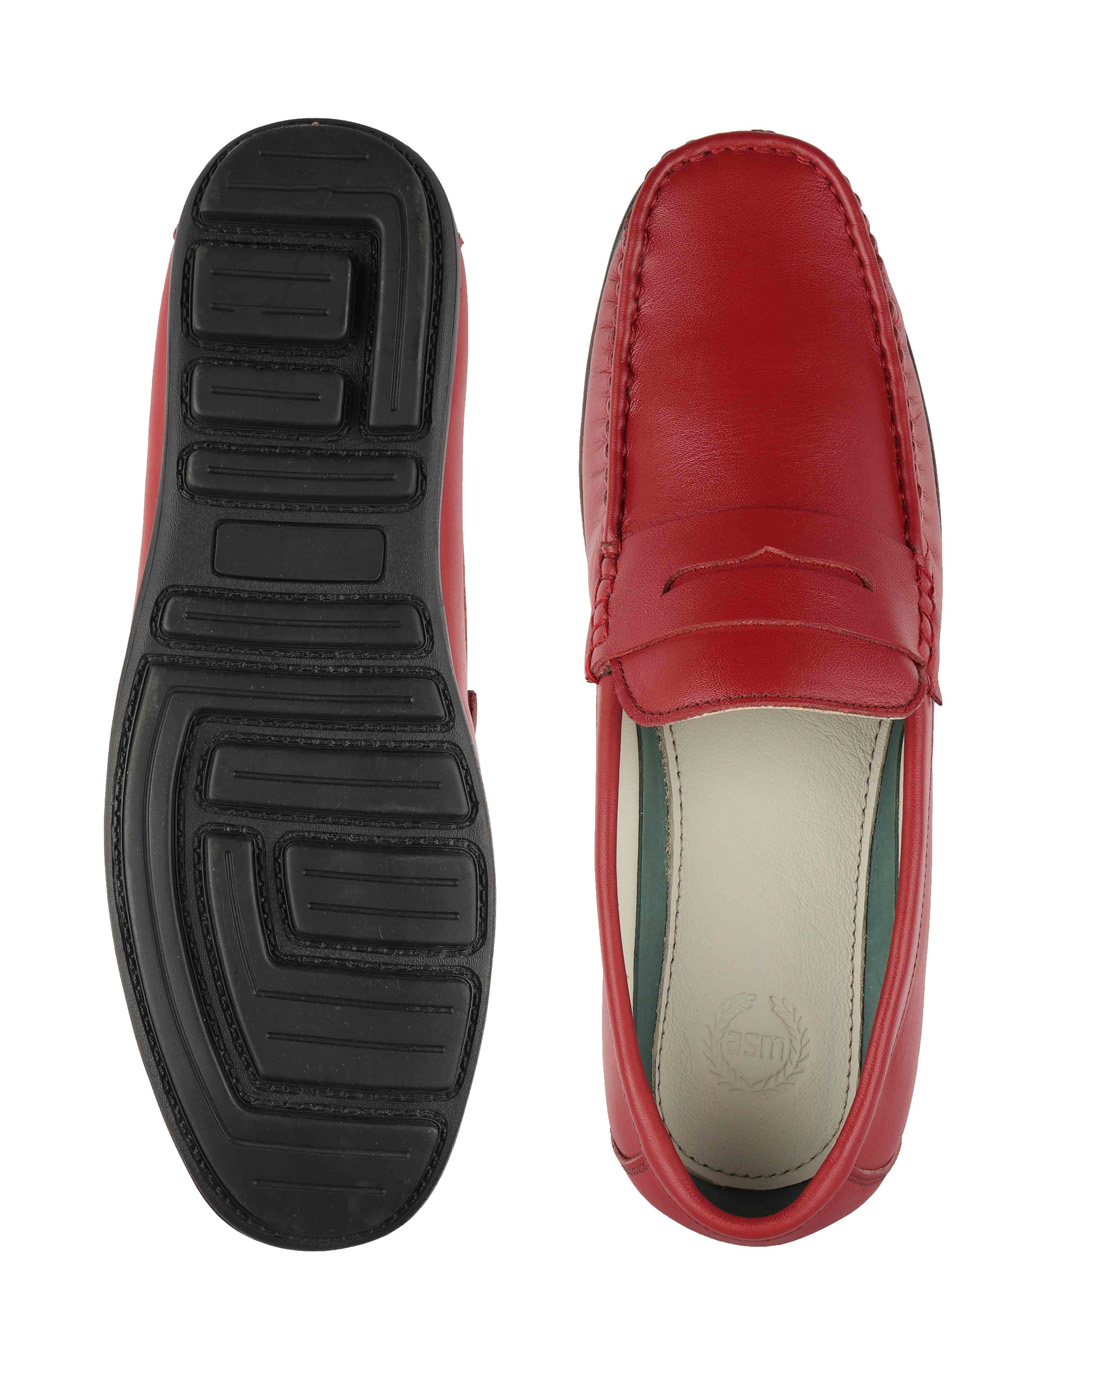 Red Loafers Buy Red Pure Leather Loafers @ Rs.1800 | Agra Mart